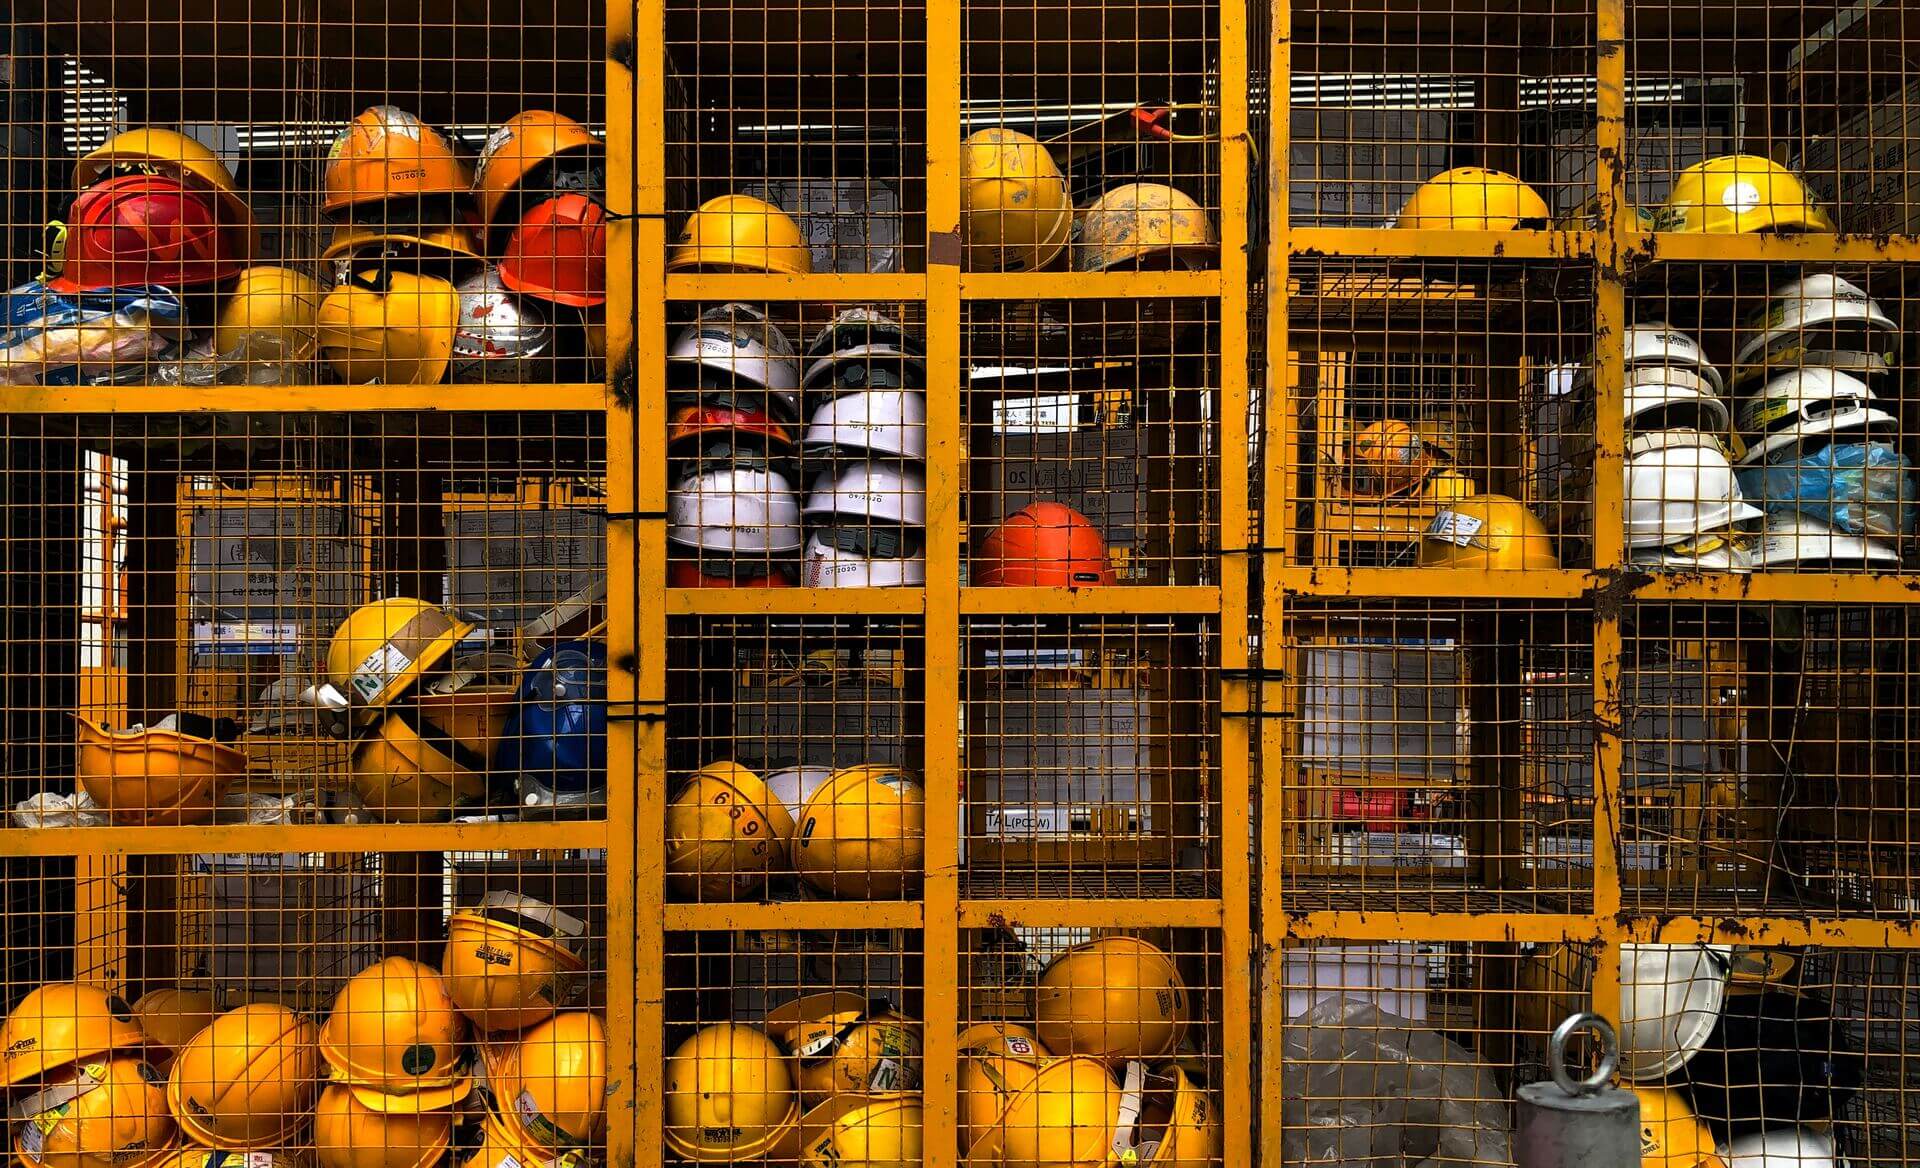 Wire lockers containing yellow construction hard hats